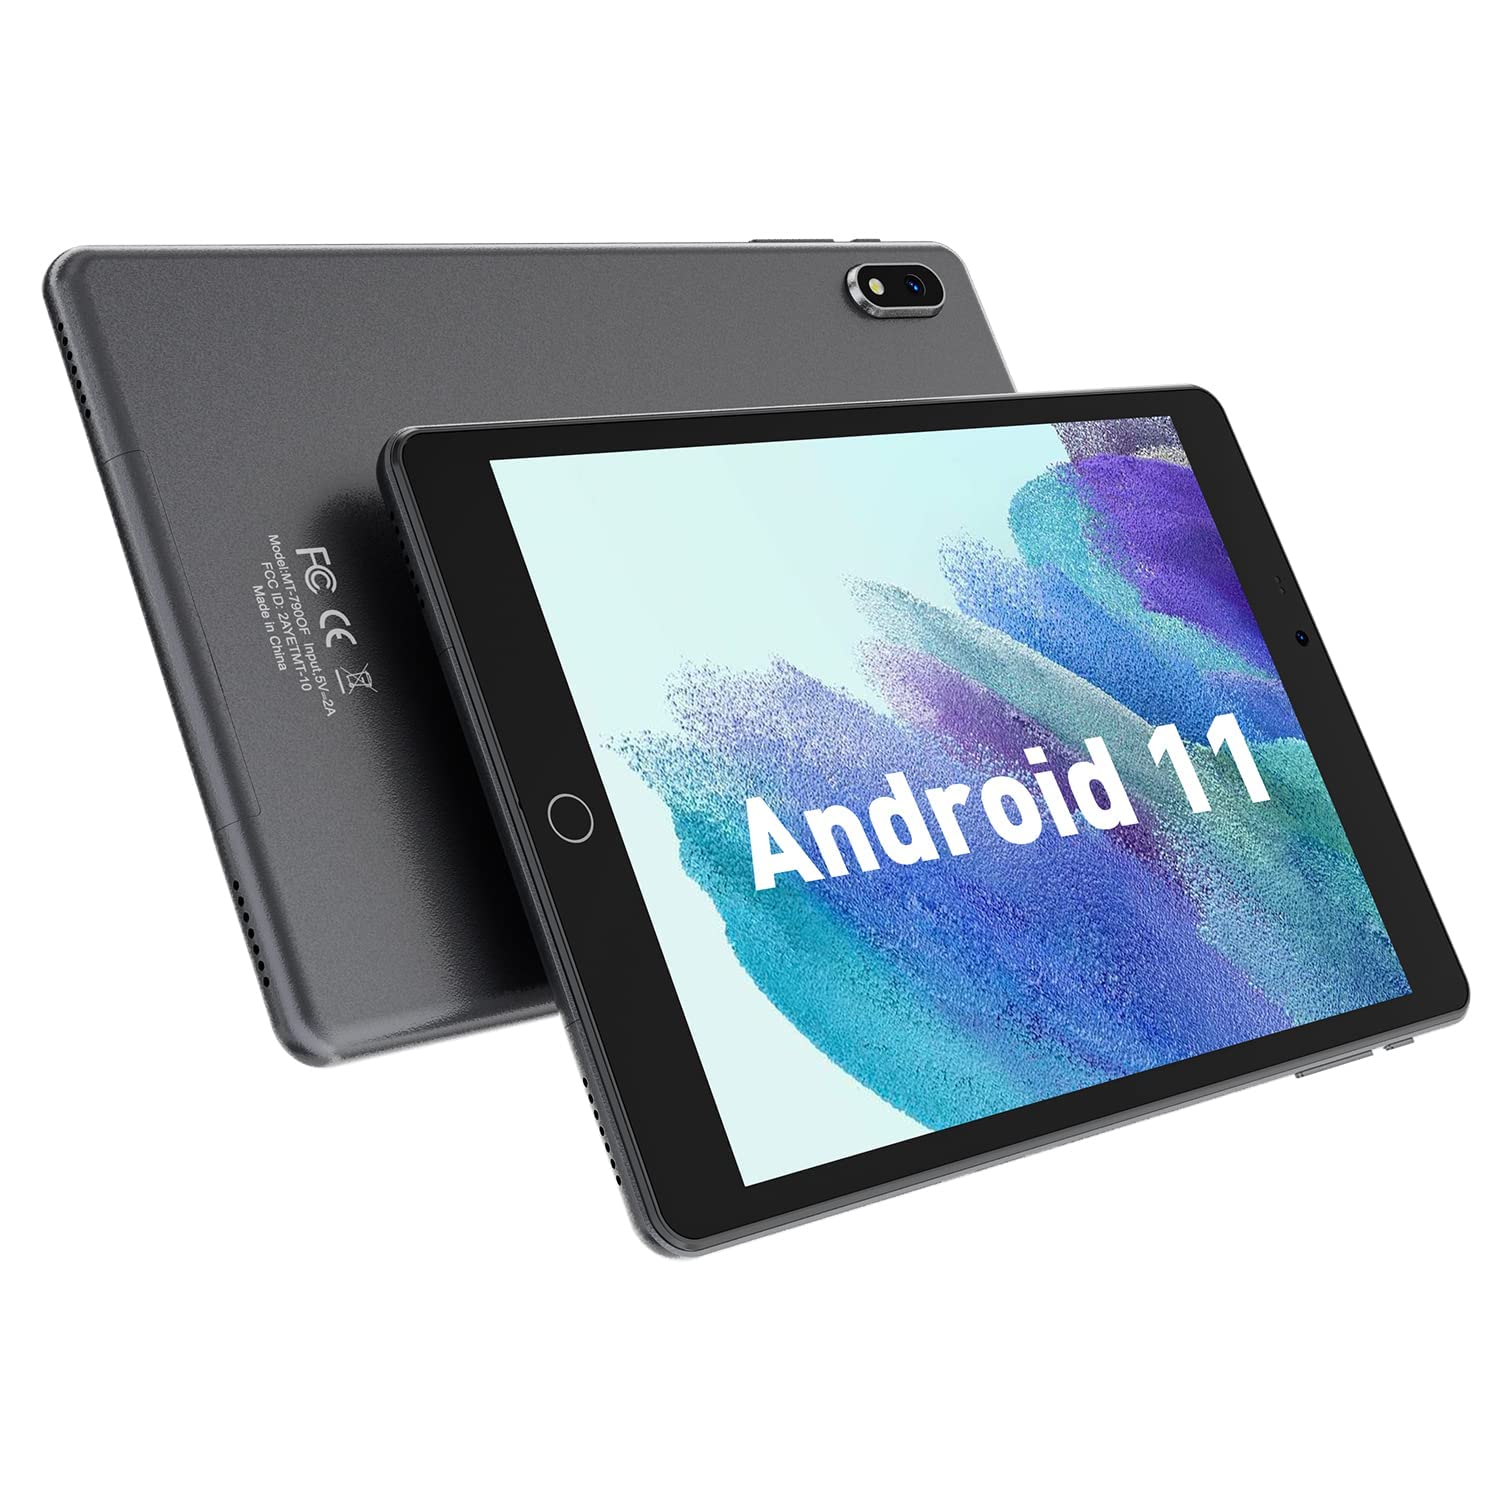 TJD Android Tablet 7.9 inch, Android 11 Tablets, 2048x1536 IPS Display, 2GB RAM 32GB ROM(512GB Expandable), Quad-Core Processor, 8MP Camera/Google Certified/Dual Speakers/Bluetooth/2.4GHz WiFi/Type-C